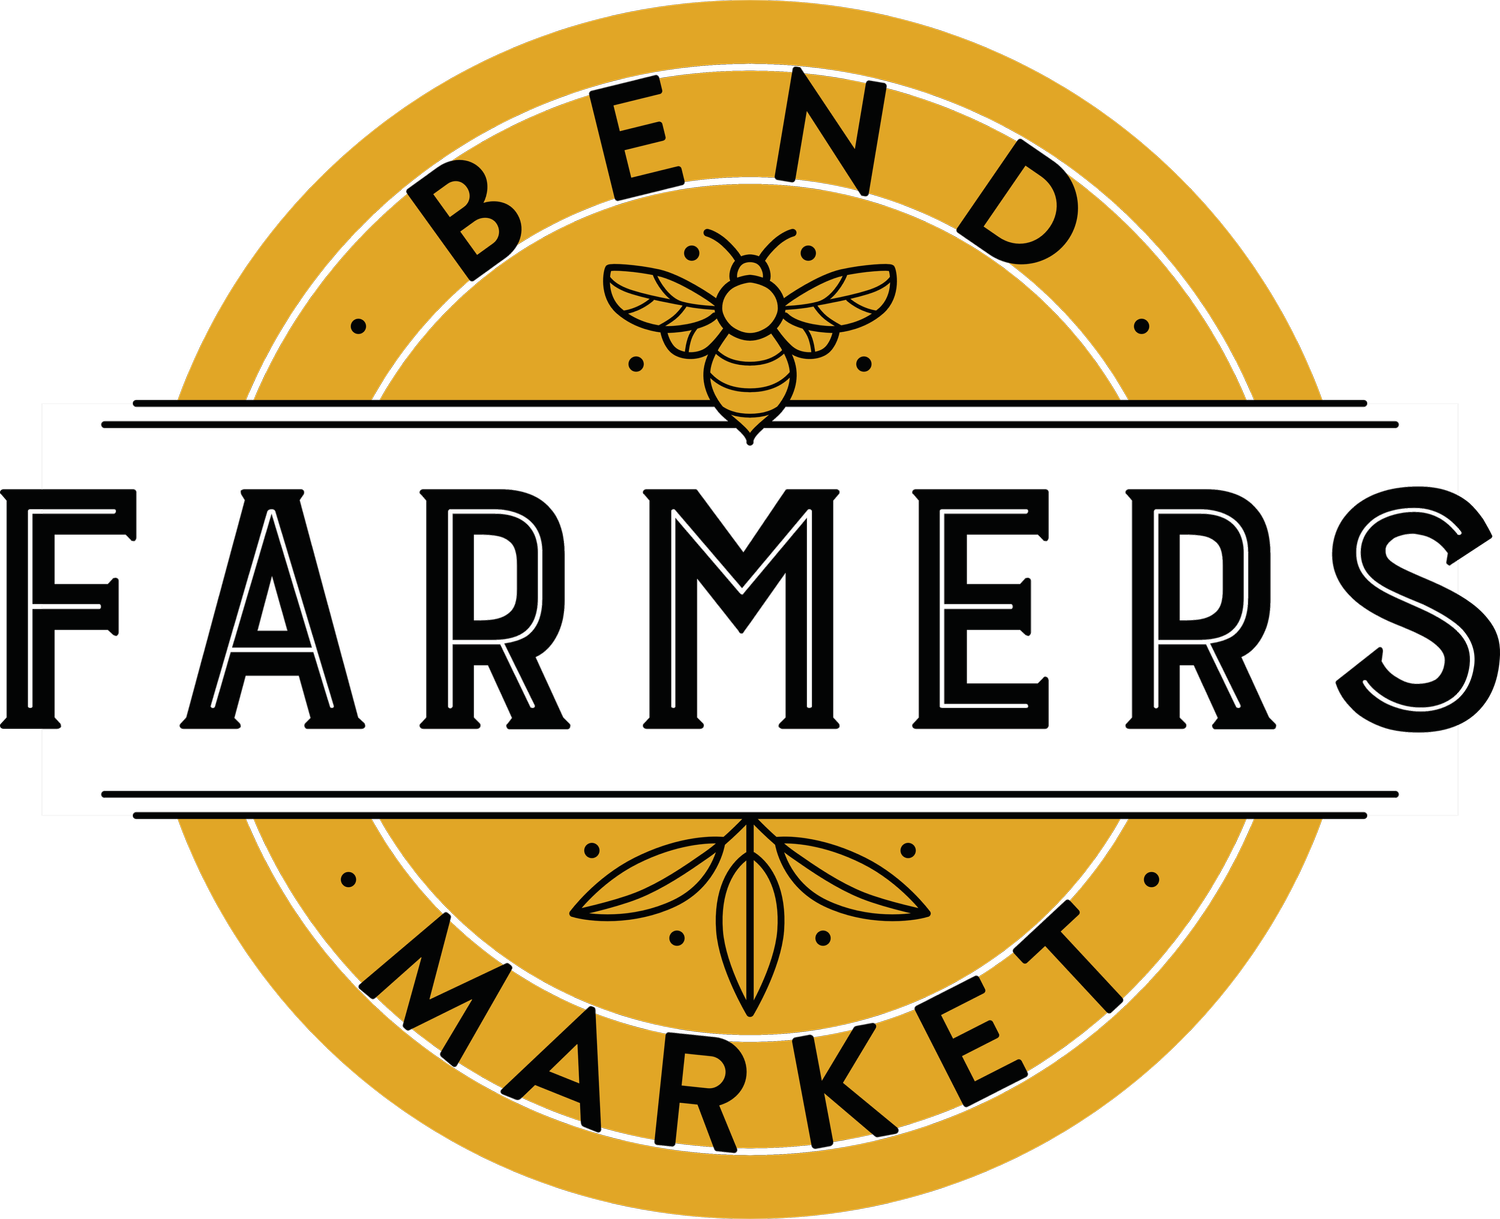 Bend Farmers Market | Supporting local farmers, ranchers, and producers who provide the best foods for Central Oregon.